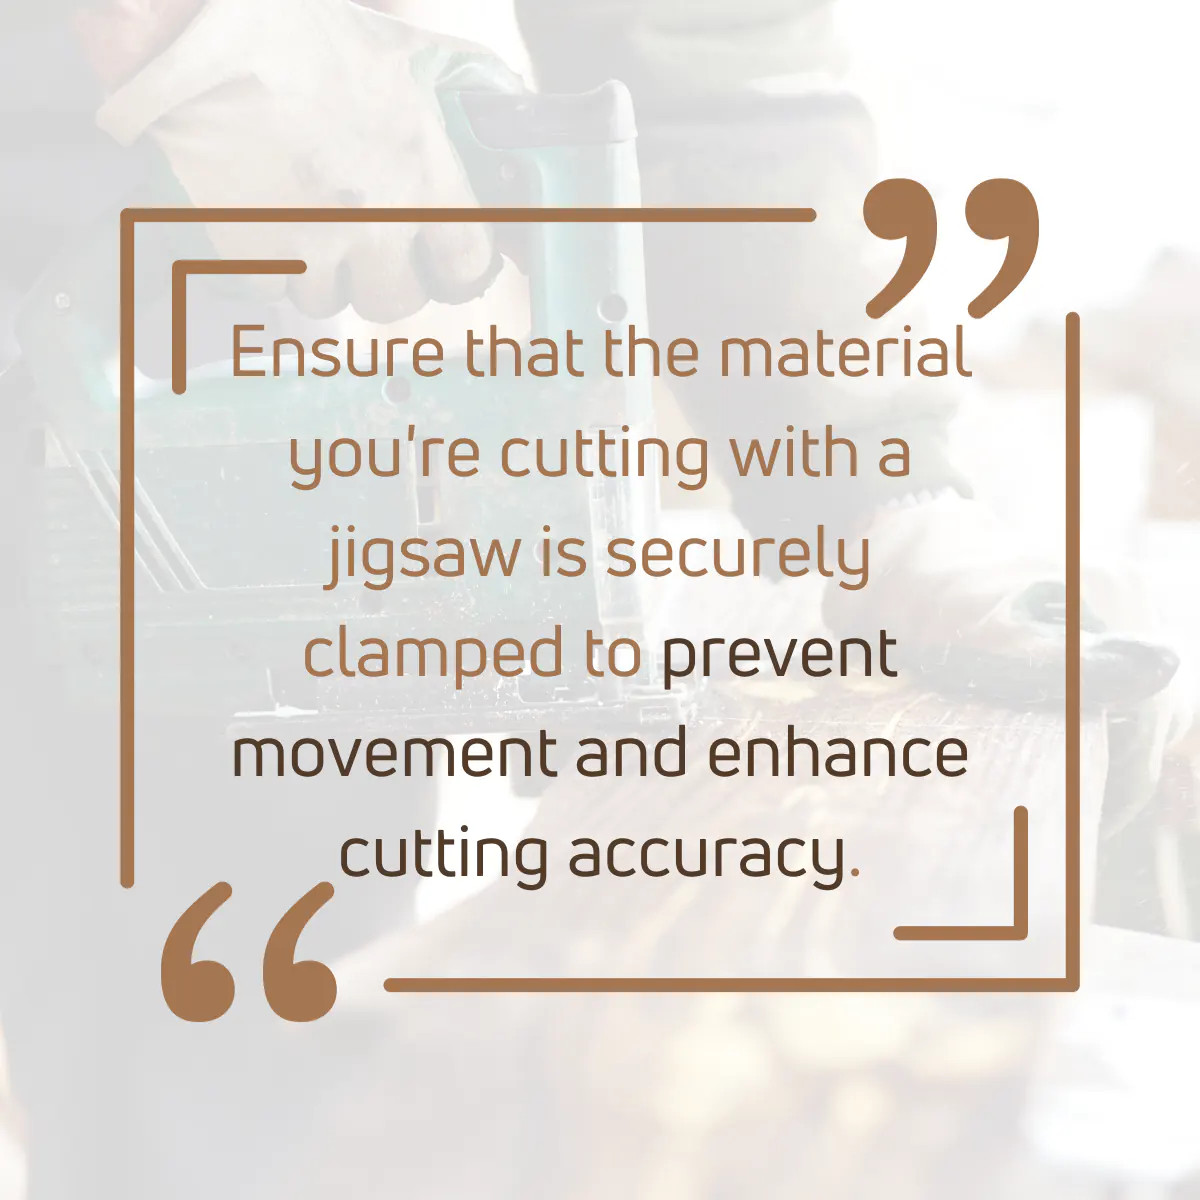 Tip for working with the Jigsaw